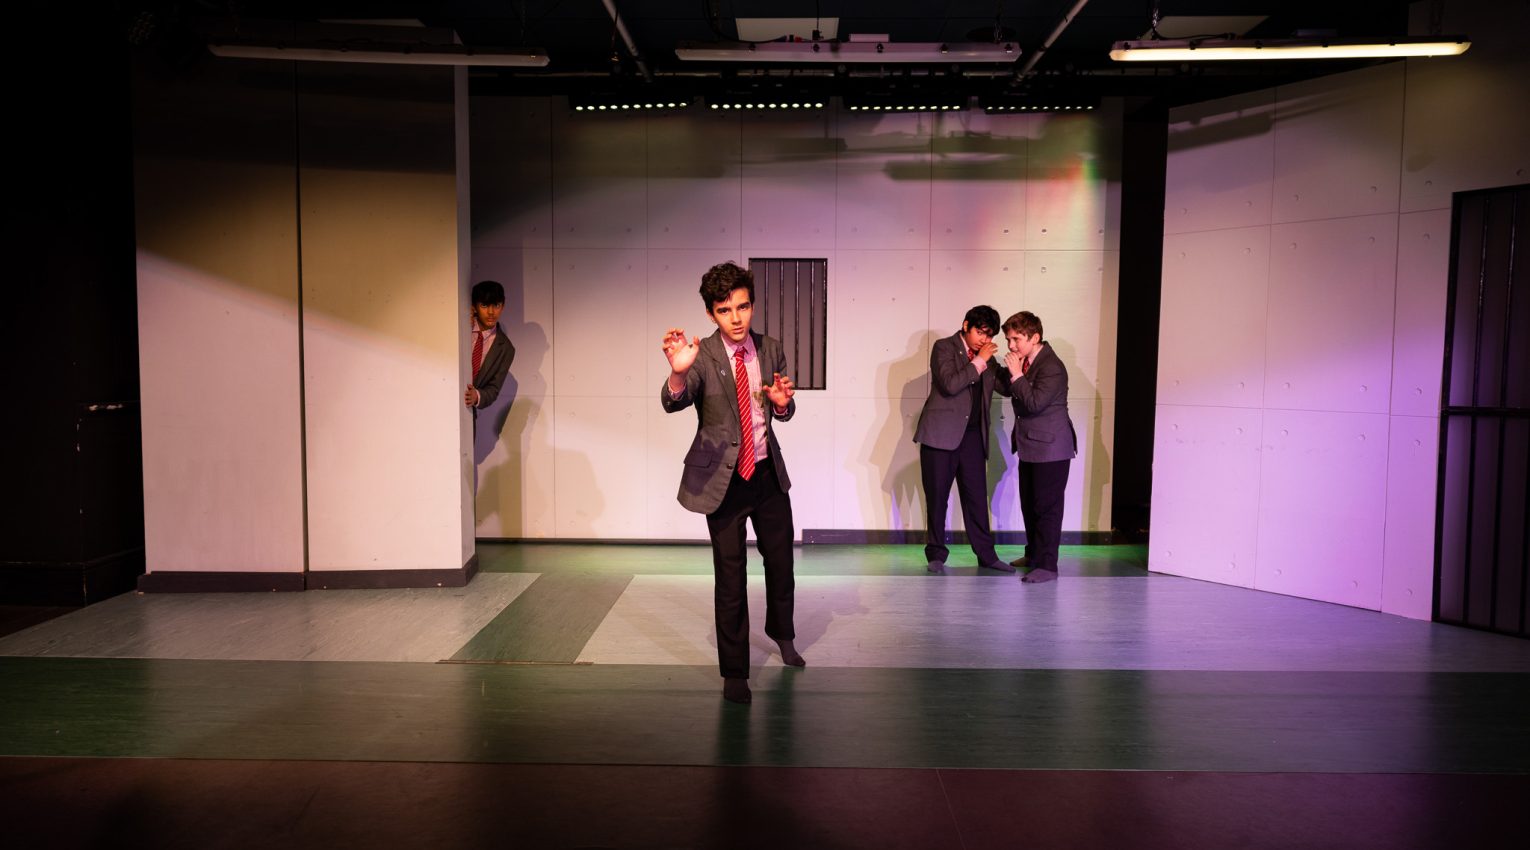 Wetherby Senior pupils make use of our School's Drama Studio